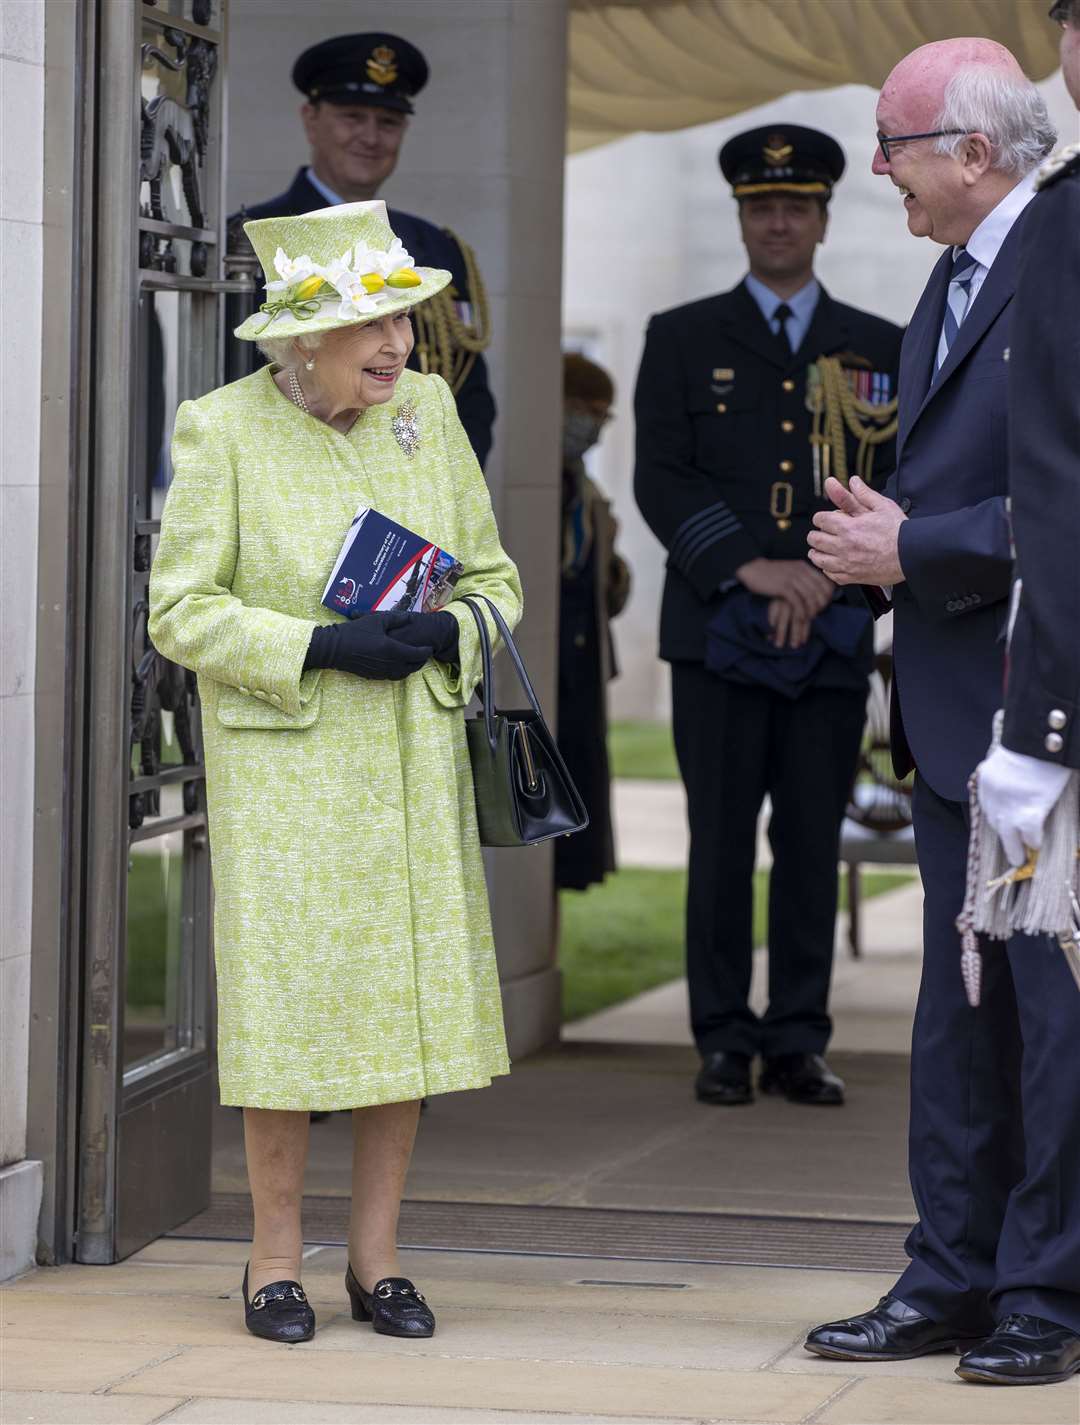 The Queen is greeted by Australia’s High Commissioner George Brandis before the service. (Steve Reigate/Daily Express/PA)